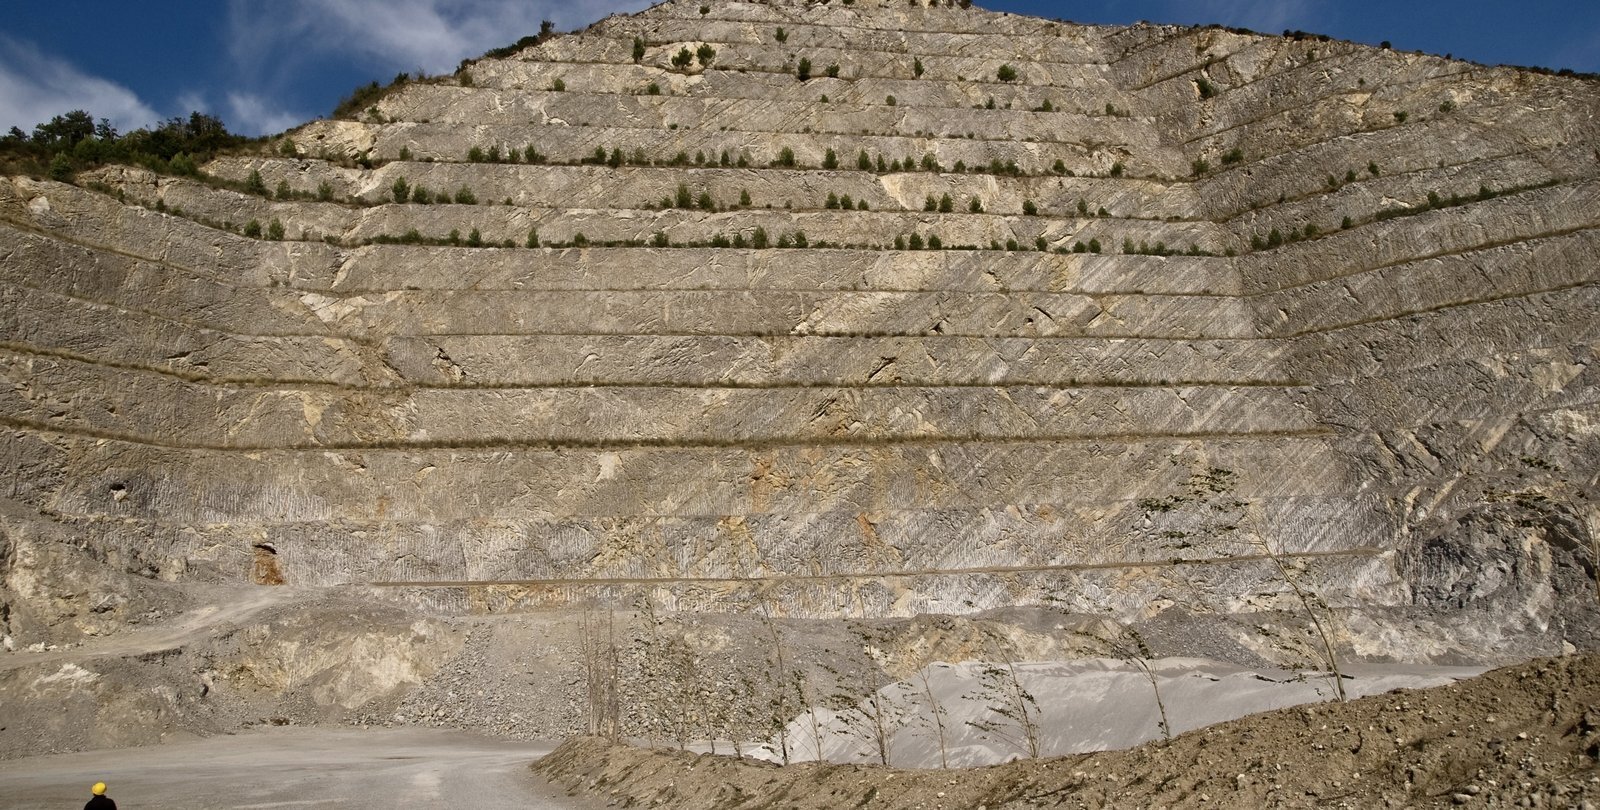 A quarry illustrating bands of stratified limestone from the ancient seafloor in what is now Mercato San Severino in Italy.